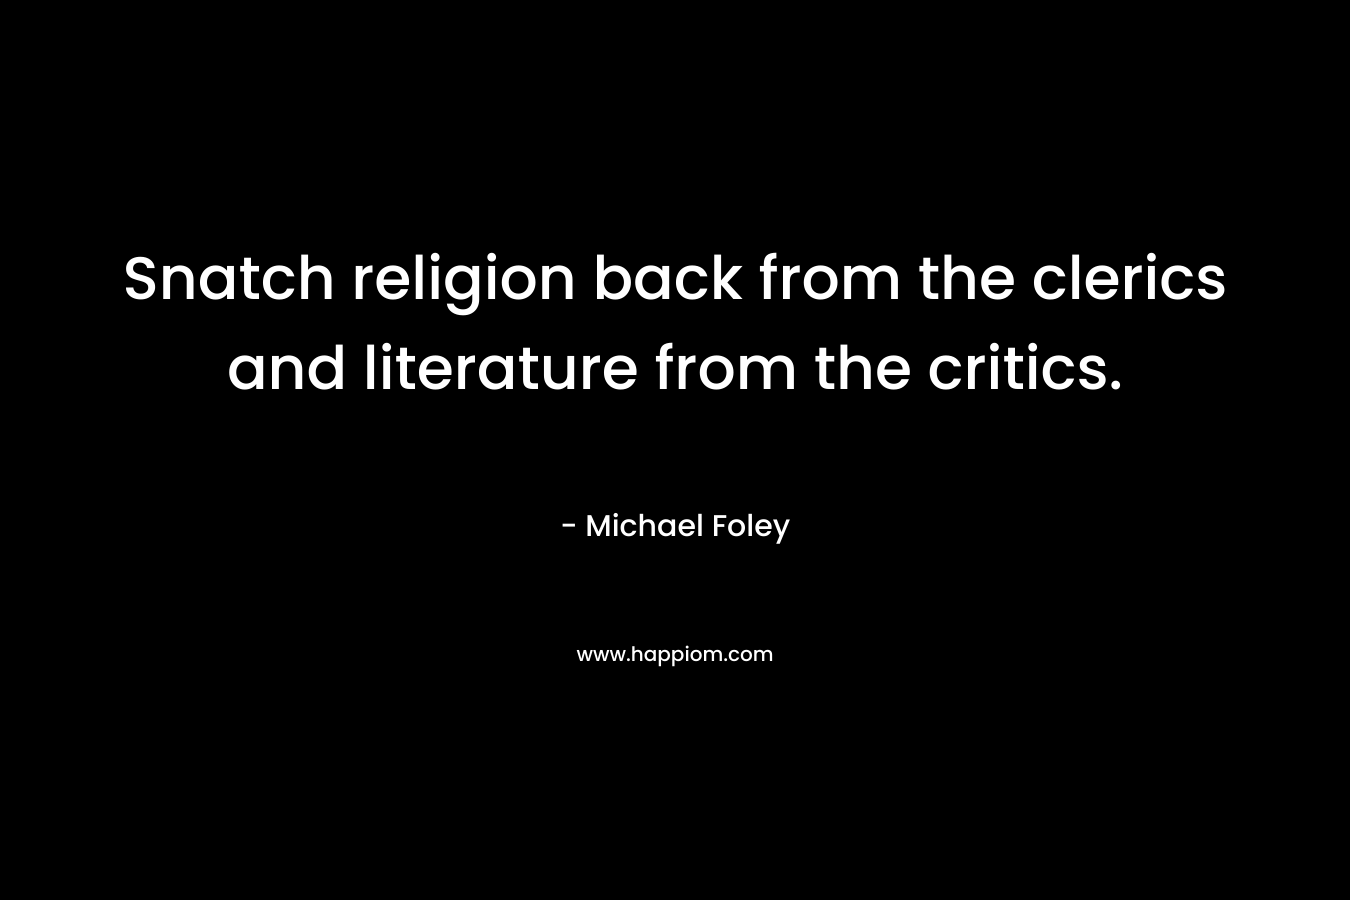 Snatch religion back from the clerics and literature from the critics.